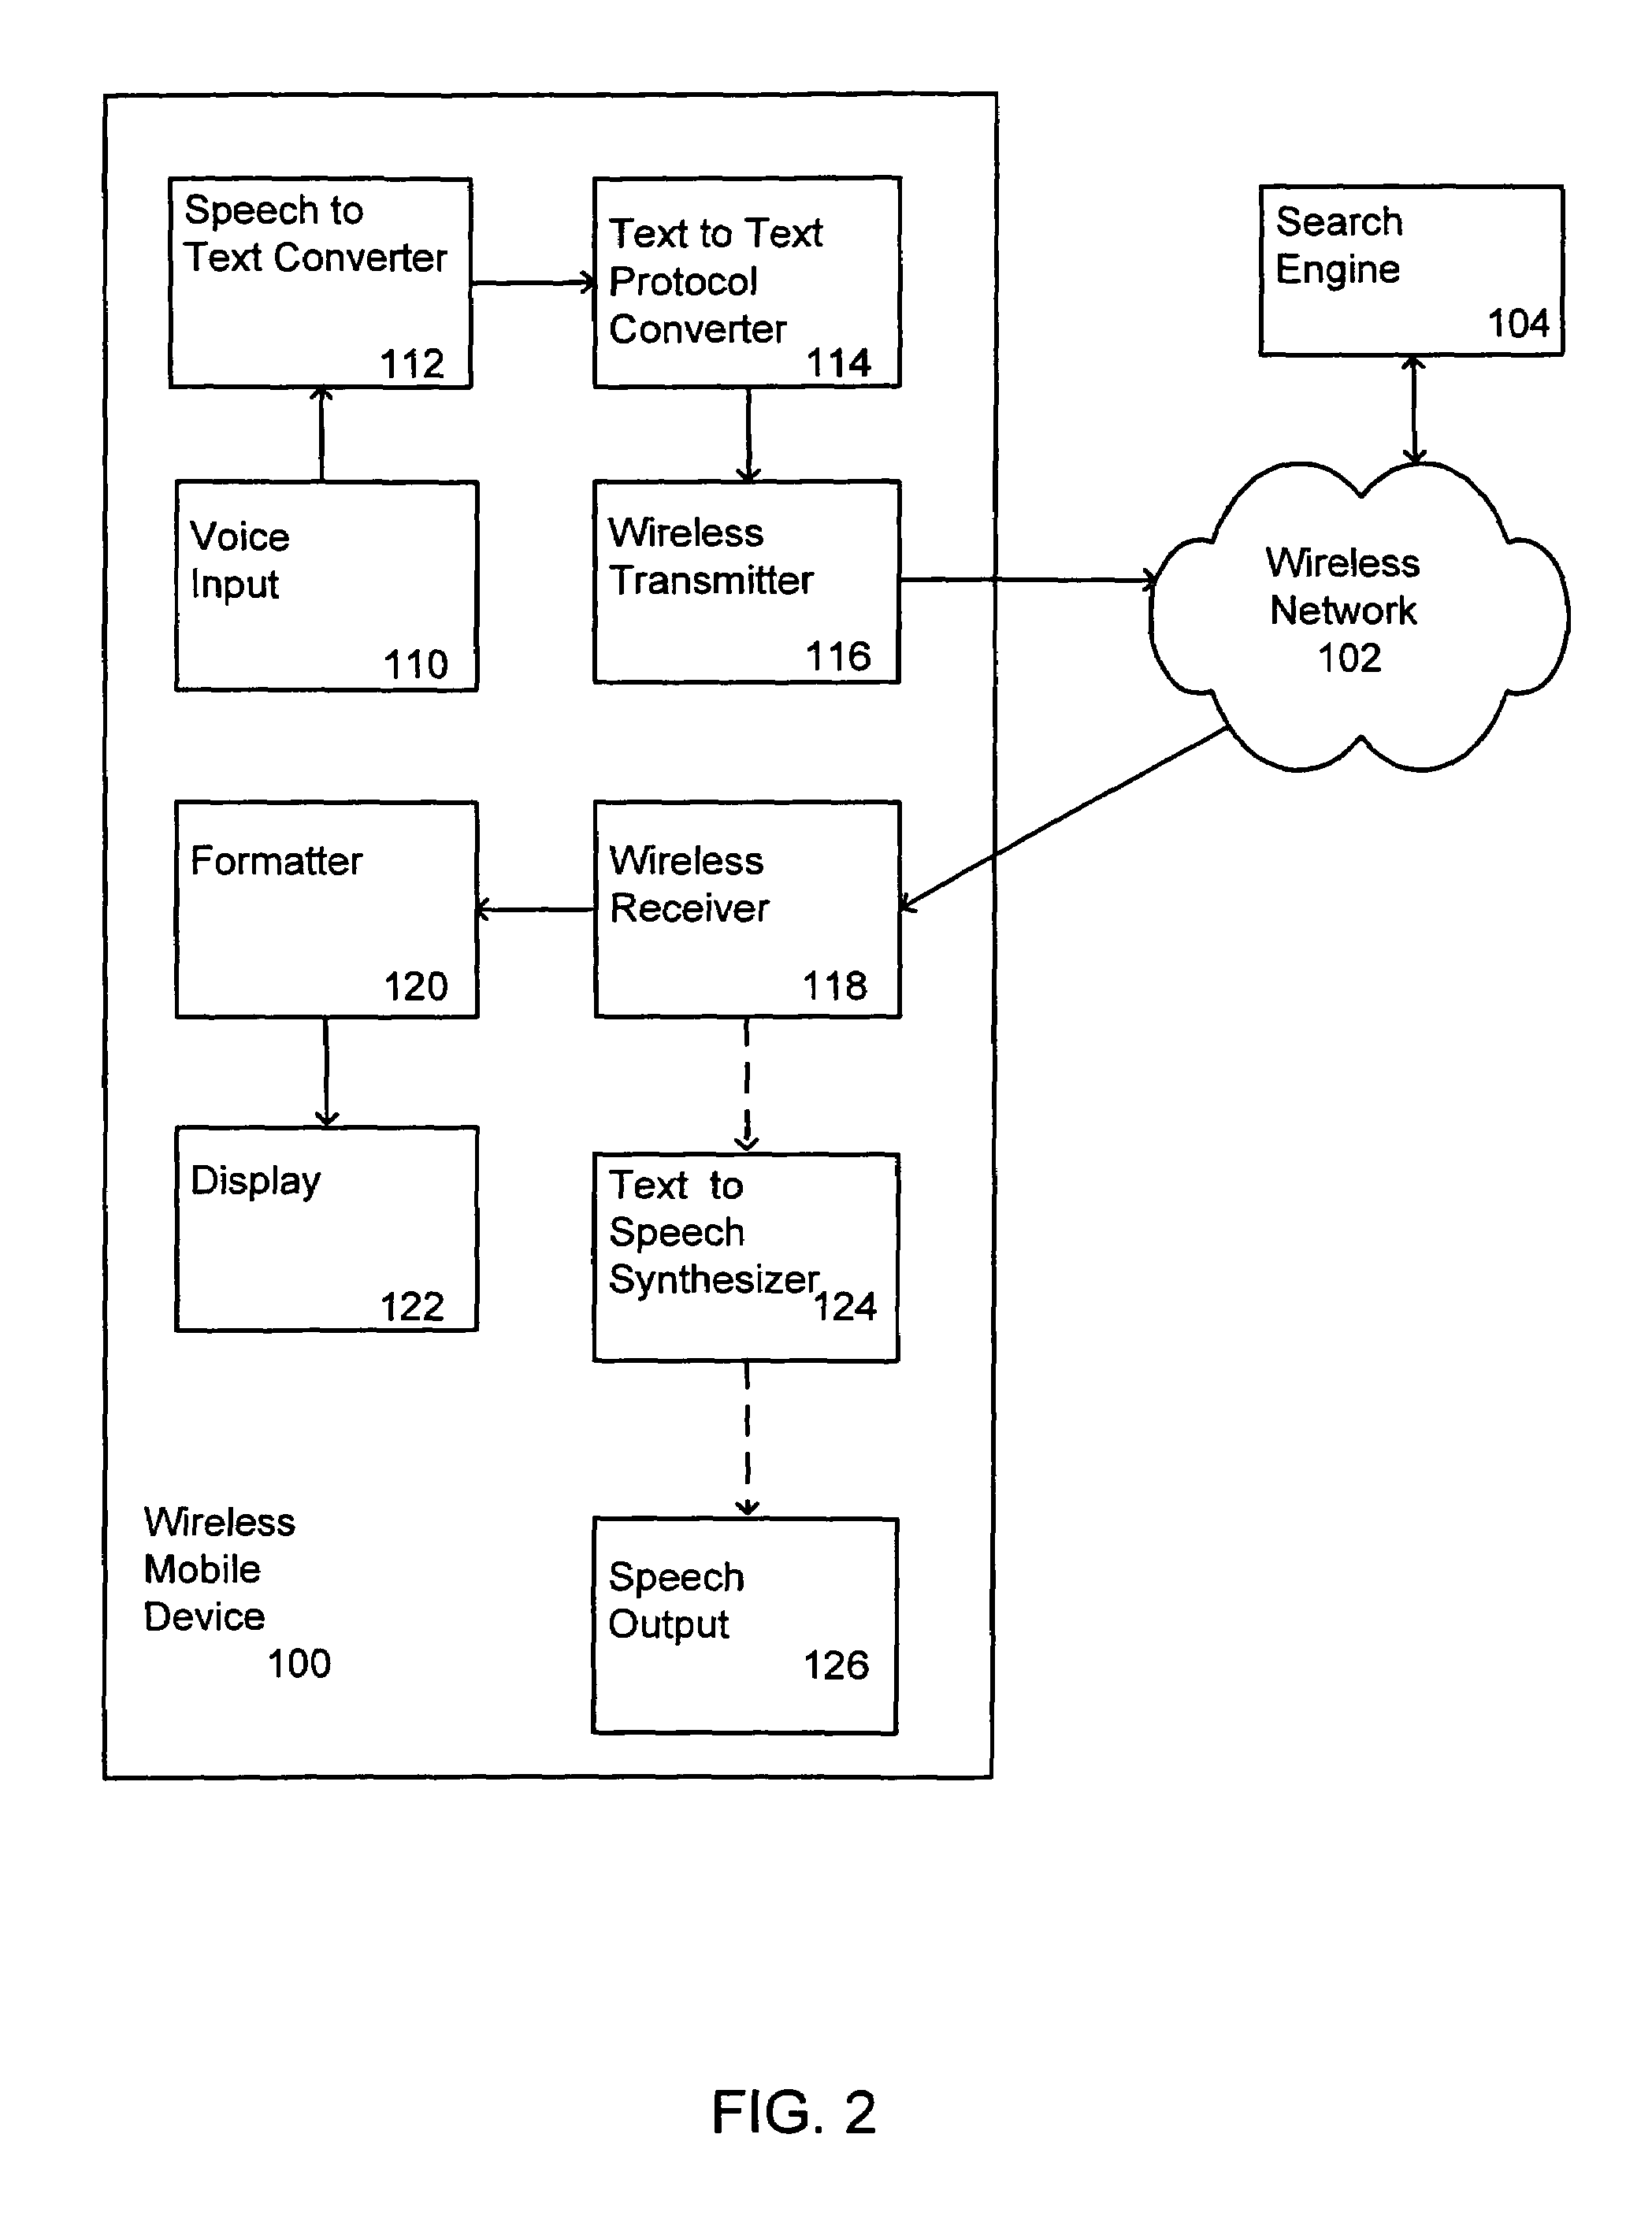 System and method for conducting a search using a wireless mobile device